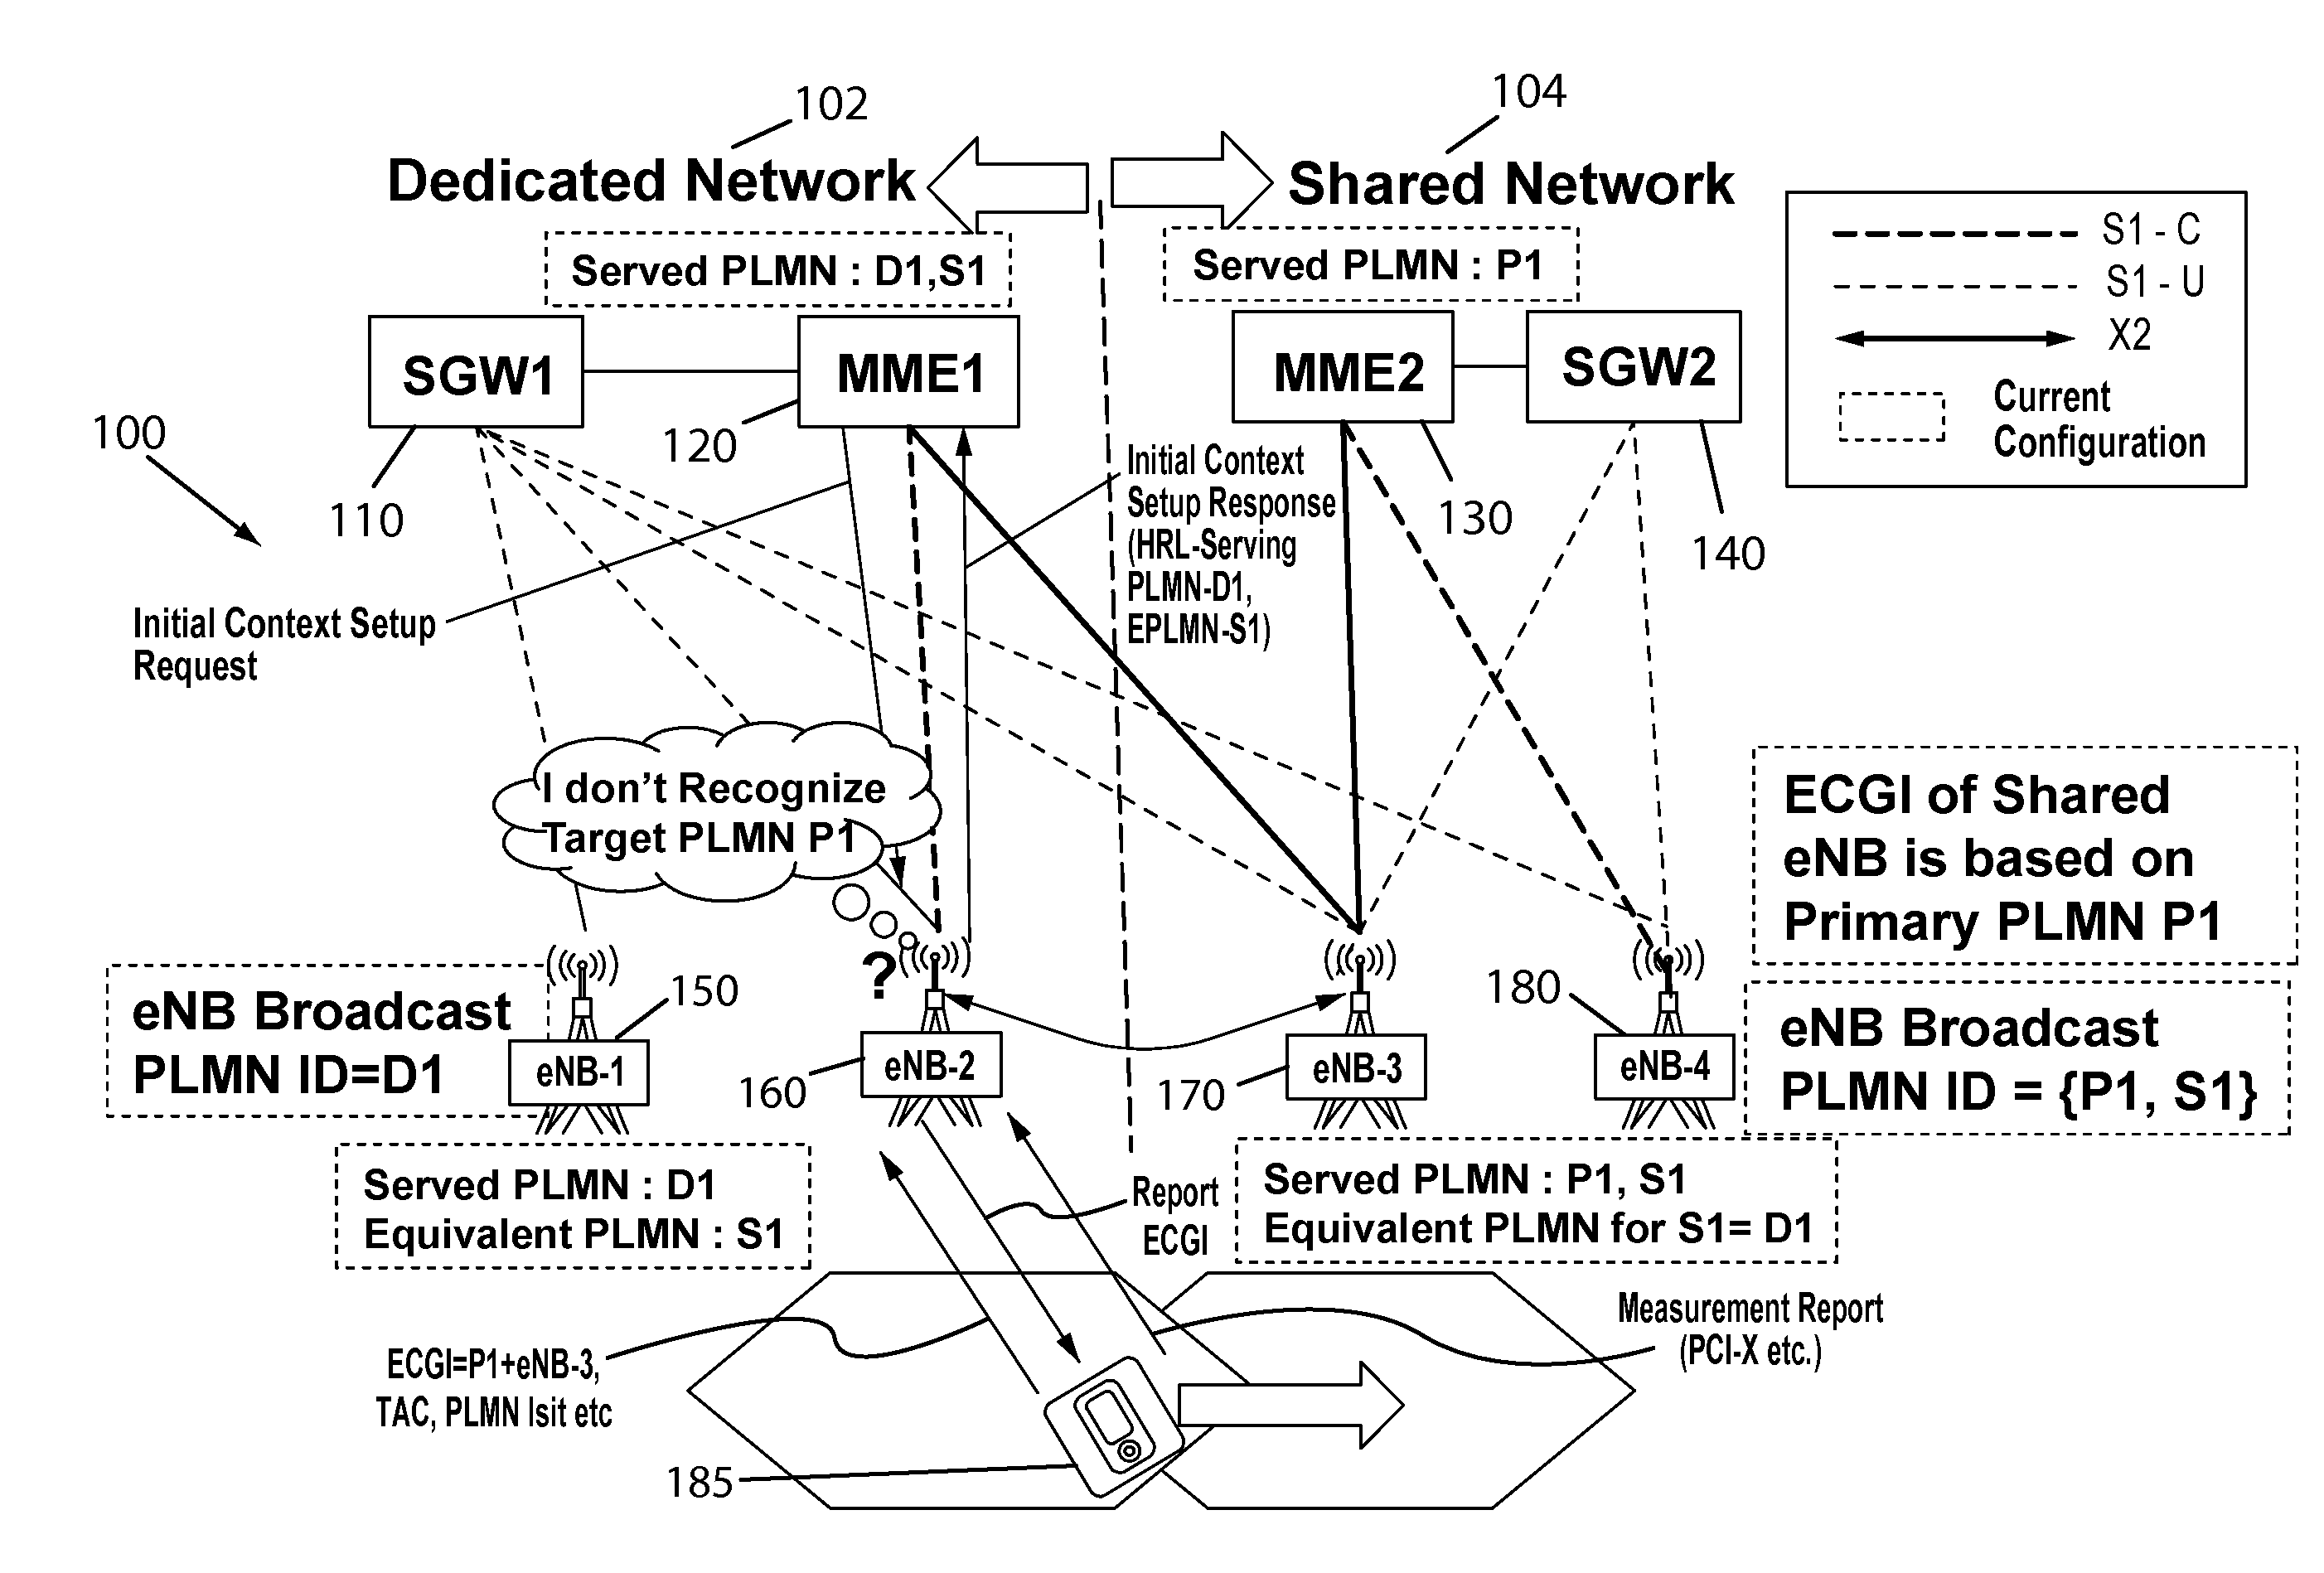 Public land mobile network resolution in a shared network and a dedicated network